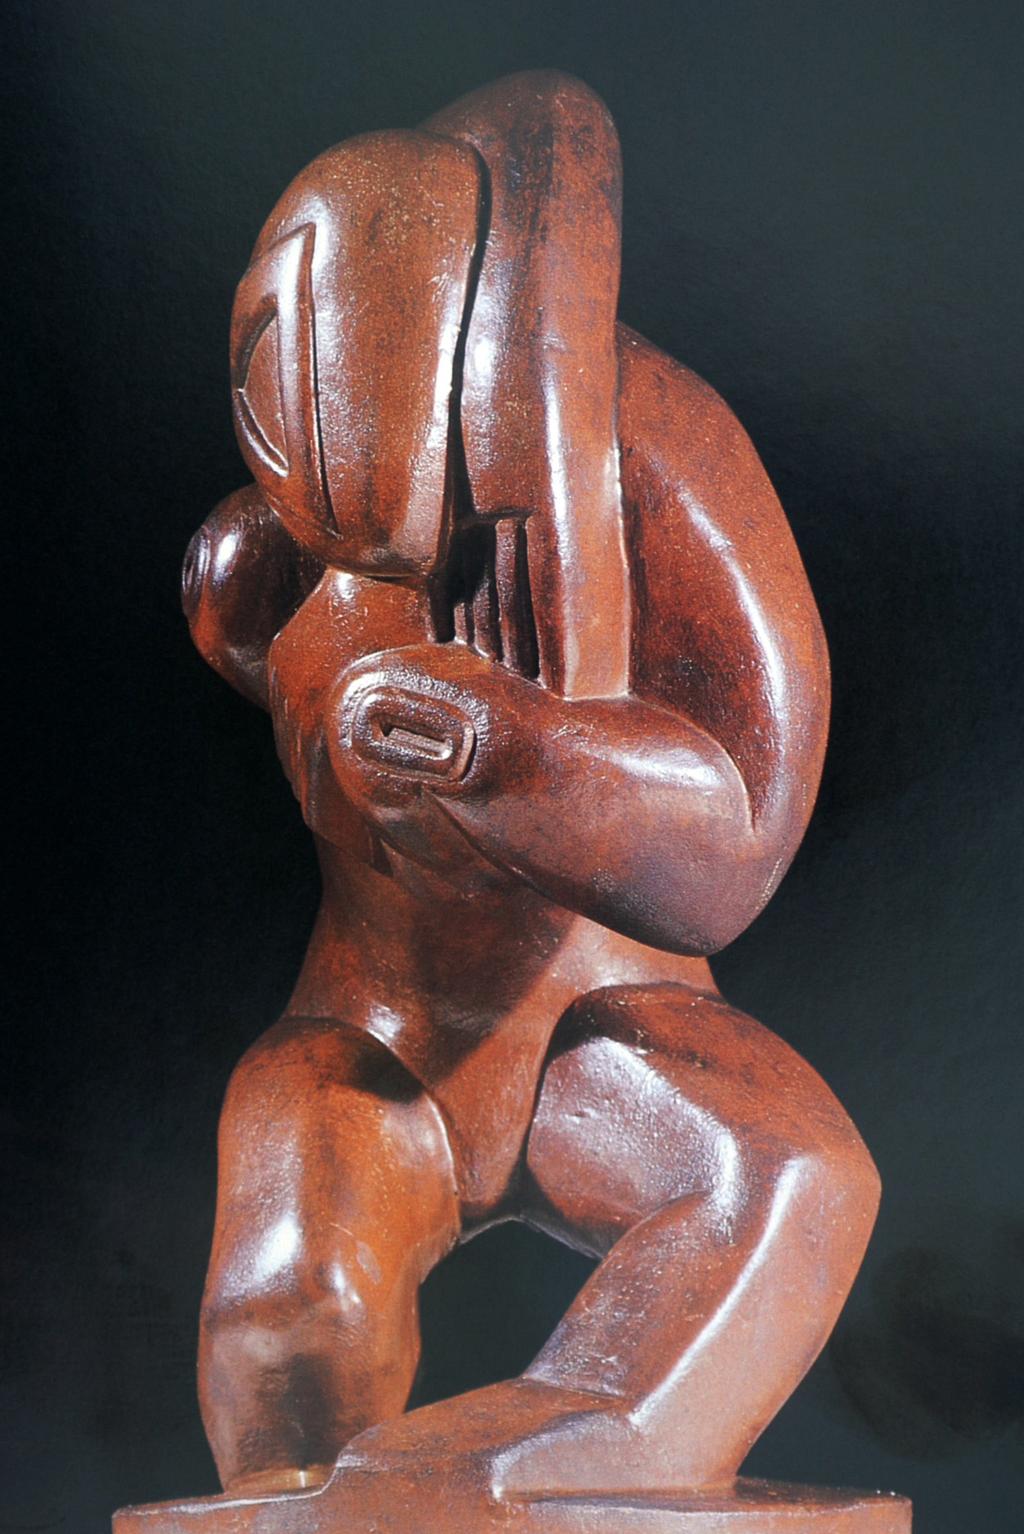 7 Image B 24 Using this image as a starting point. Either: Red Stone Dancer by Gaudier-Brzeska 1914 Tate, London 2007 (a) Examine dance as a subject in different centuries, styles or cultures.